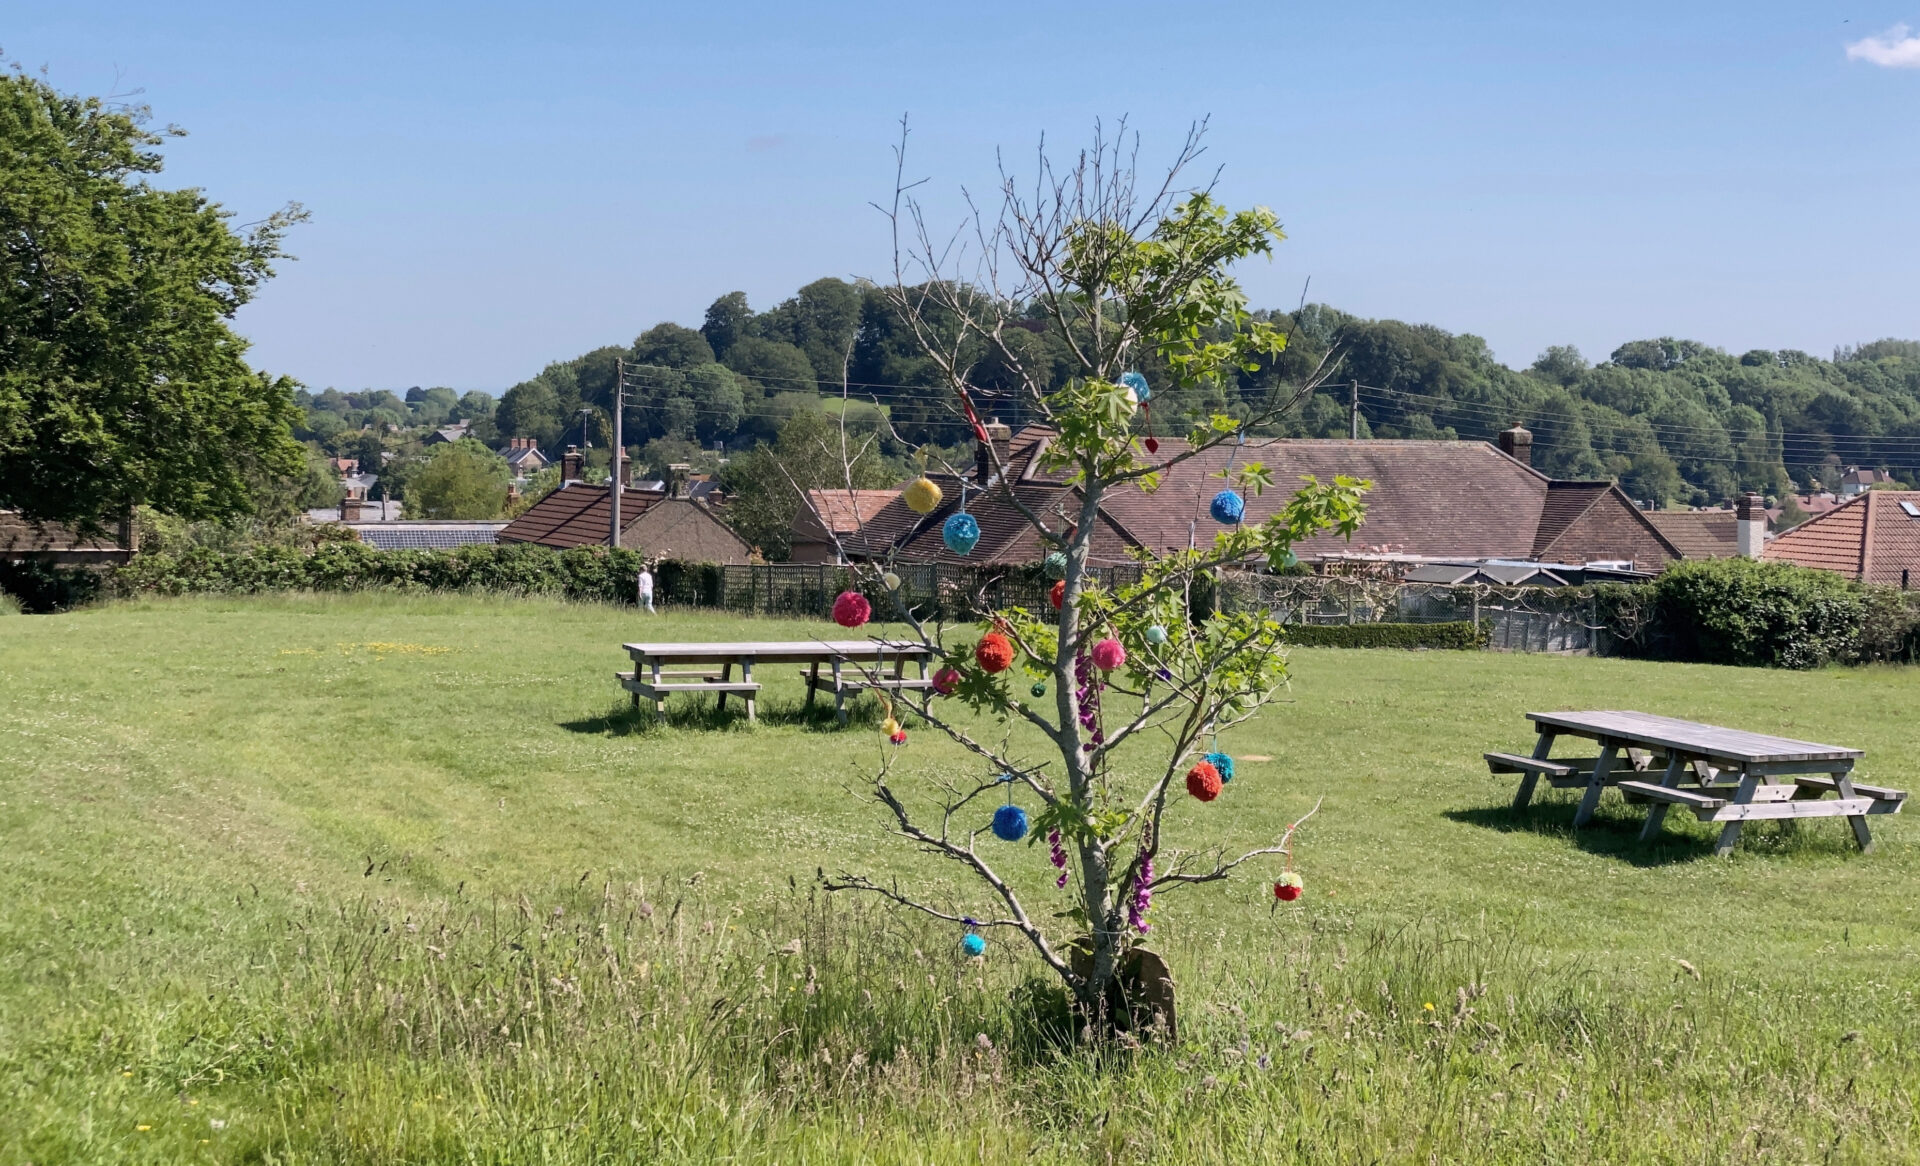 Pom poms hanging from a tree at Barn Close Recreation Ground. Photo by Jeff Hutson